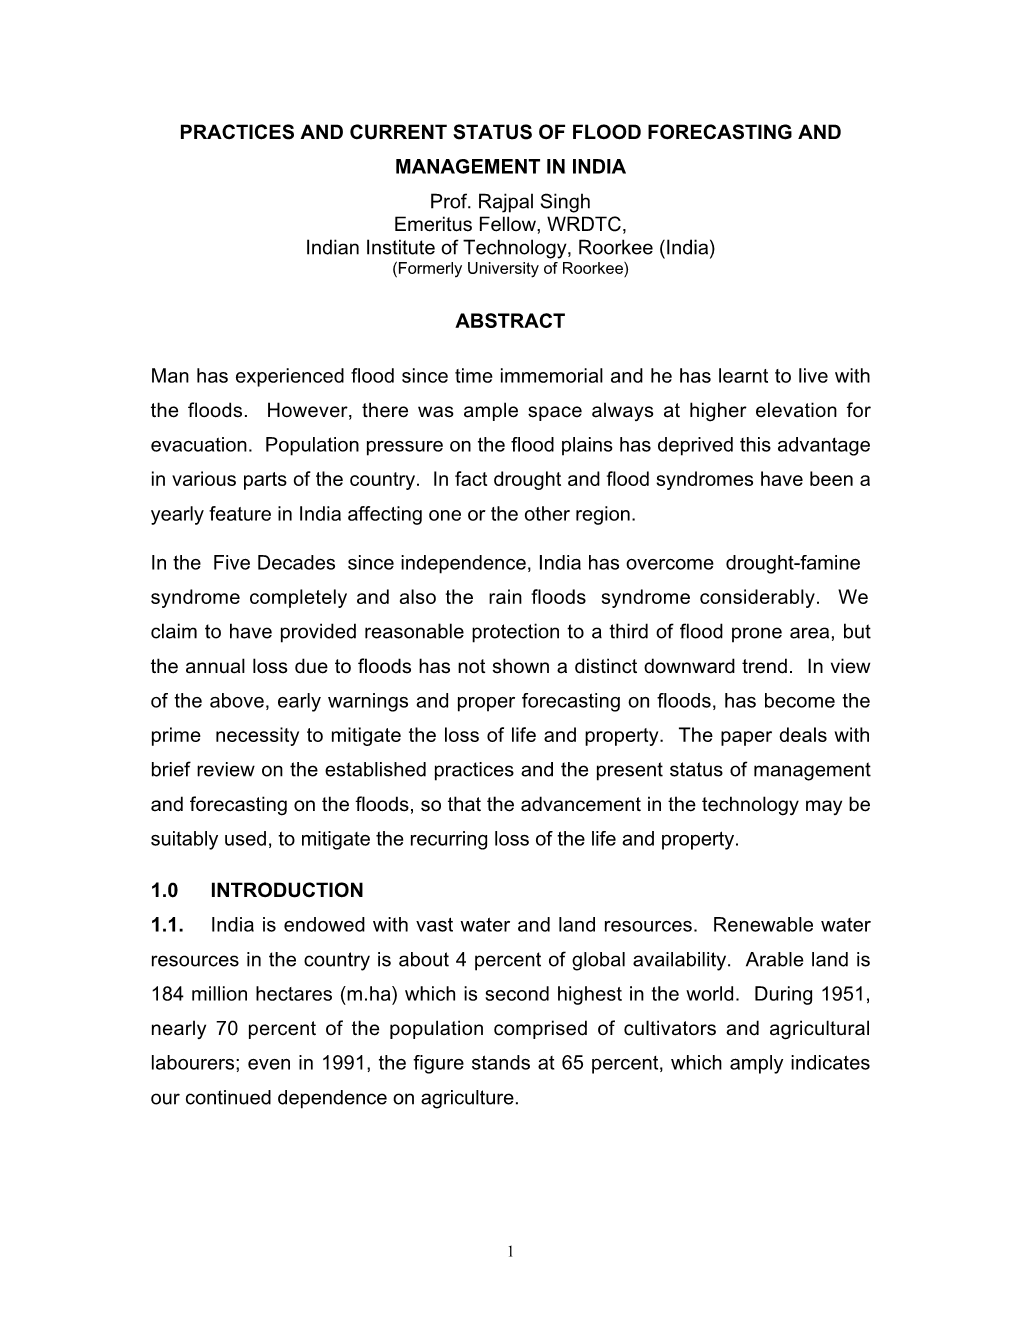 PRACTICES and CURRENT STATUS of FLOOD FORECASTING and MANAGEMENT in INDIA Prof